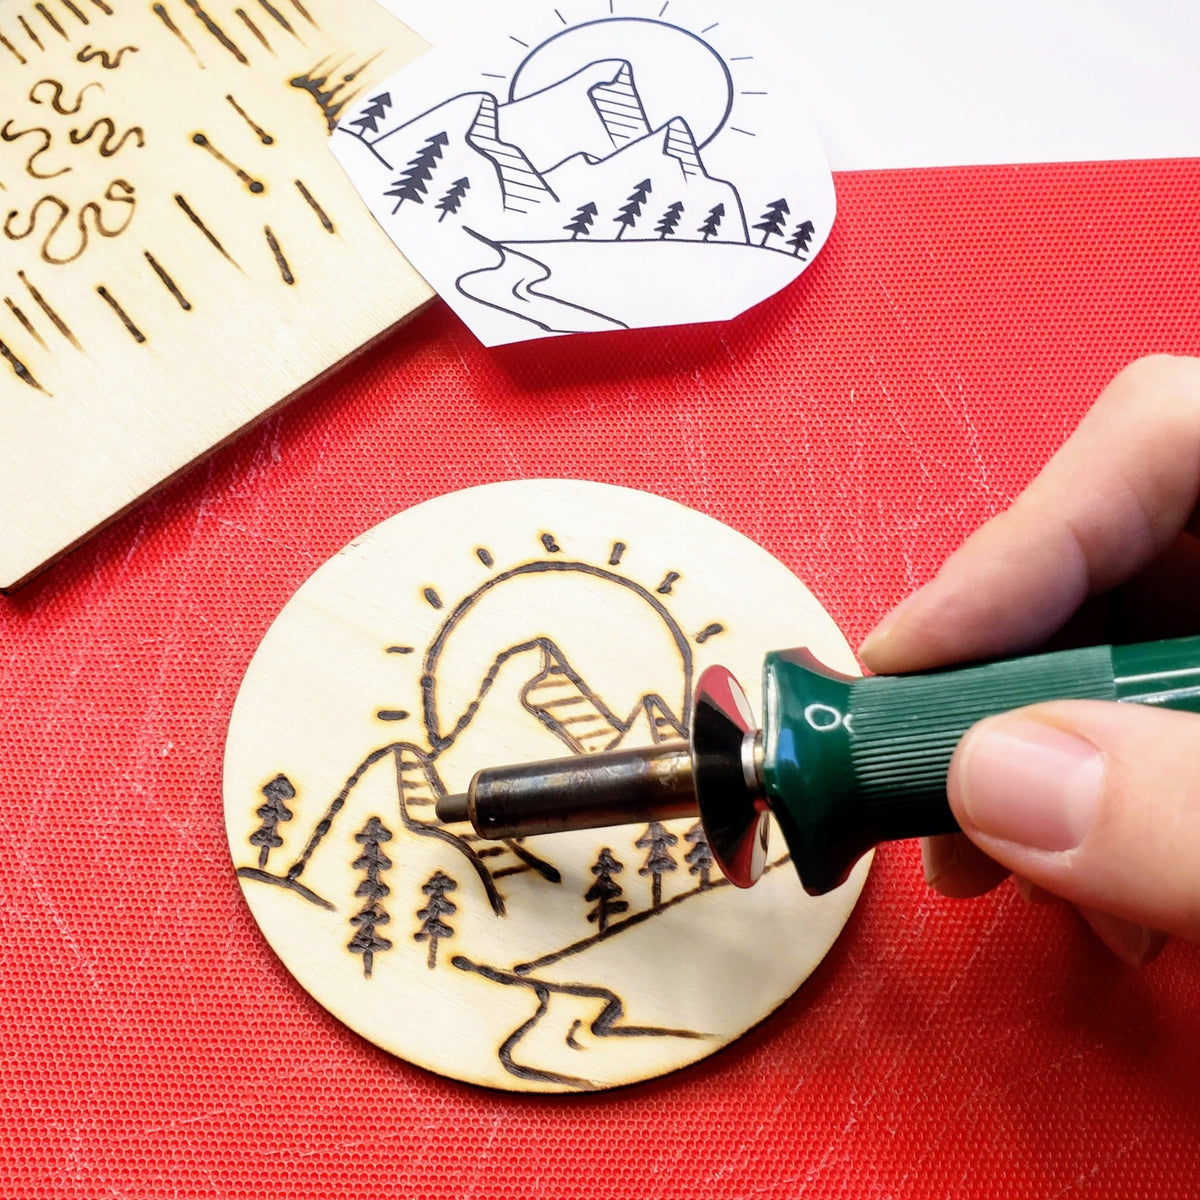 Wood Burning Tips and Tricks - Pyrography Online